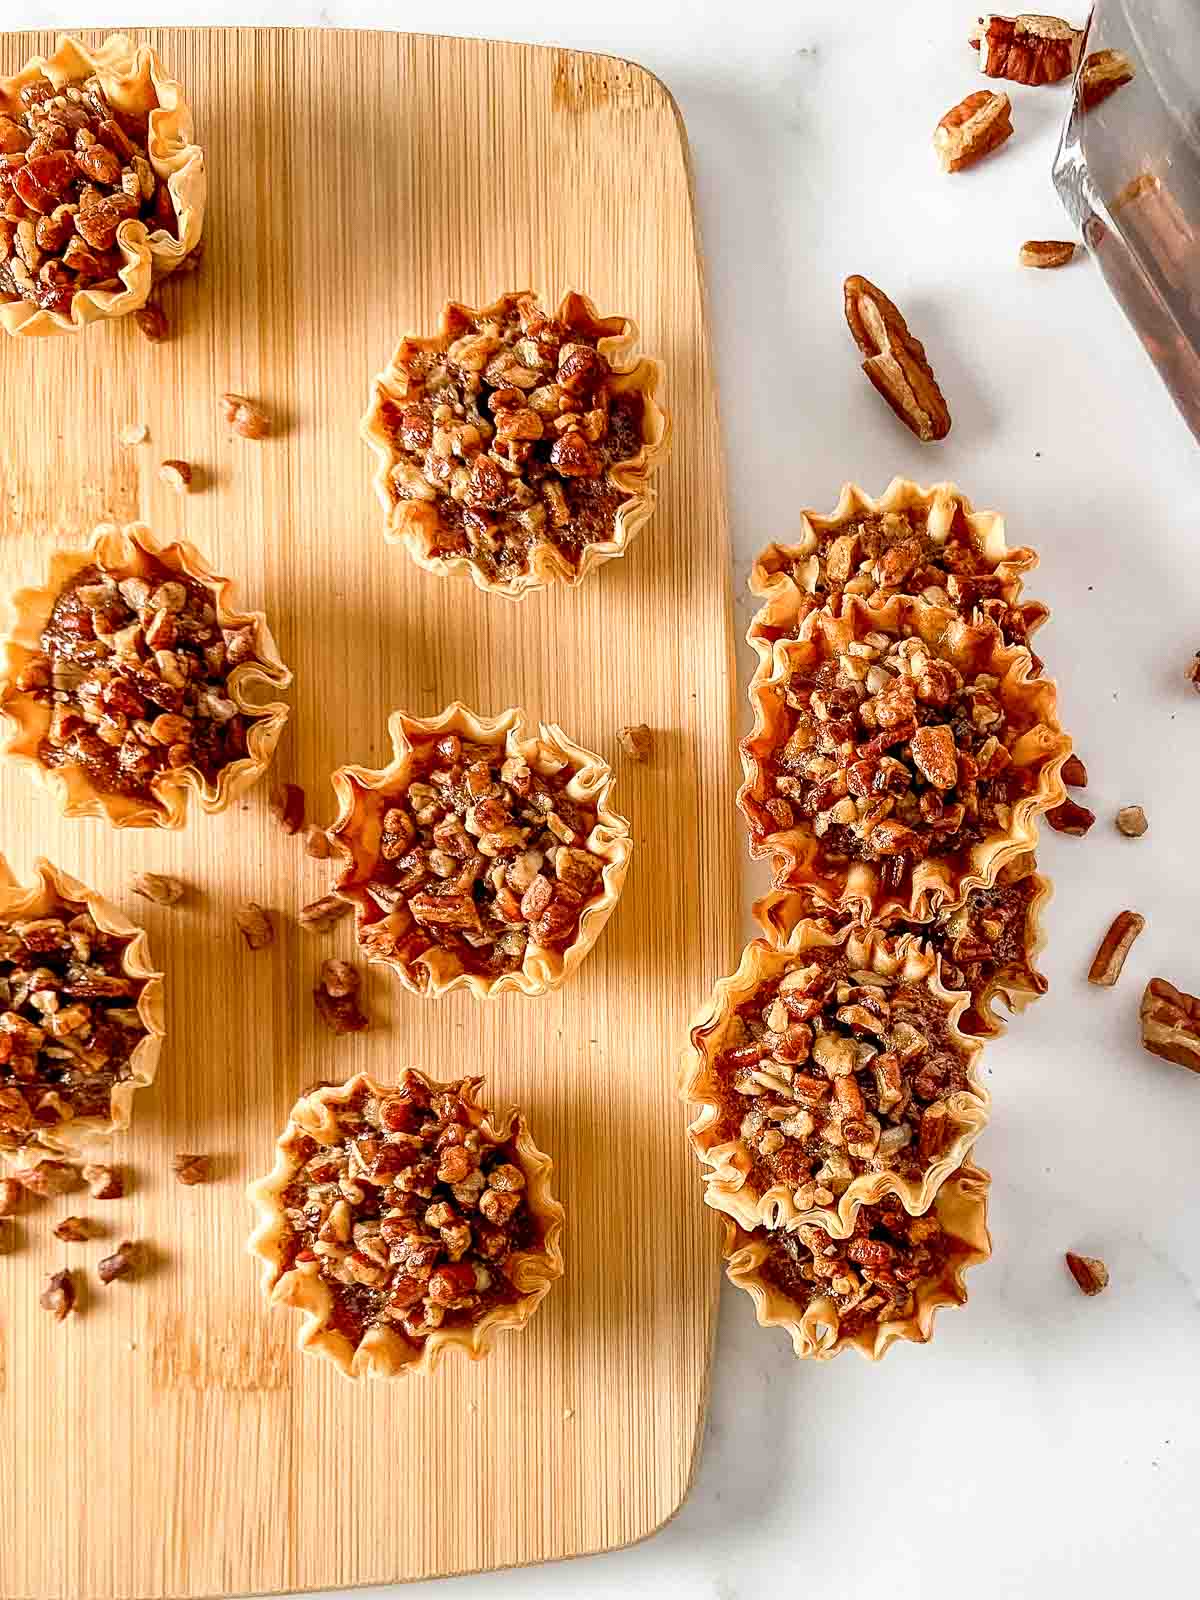 Cutting board with phyllo cup pecan pie bites arranged on it